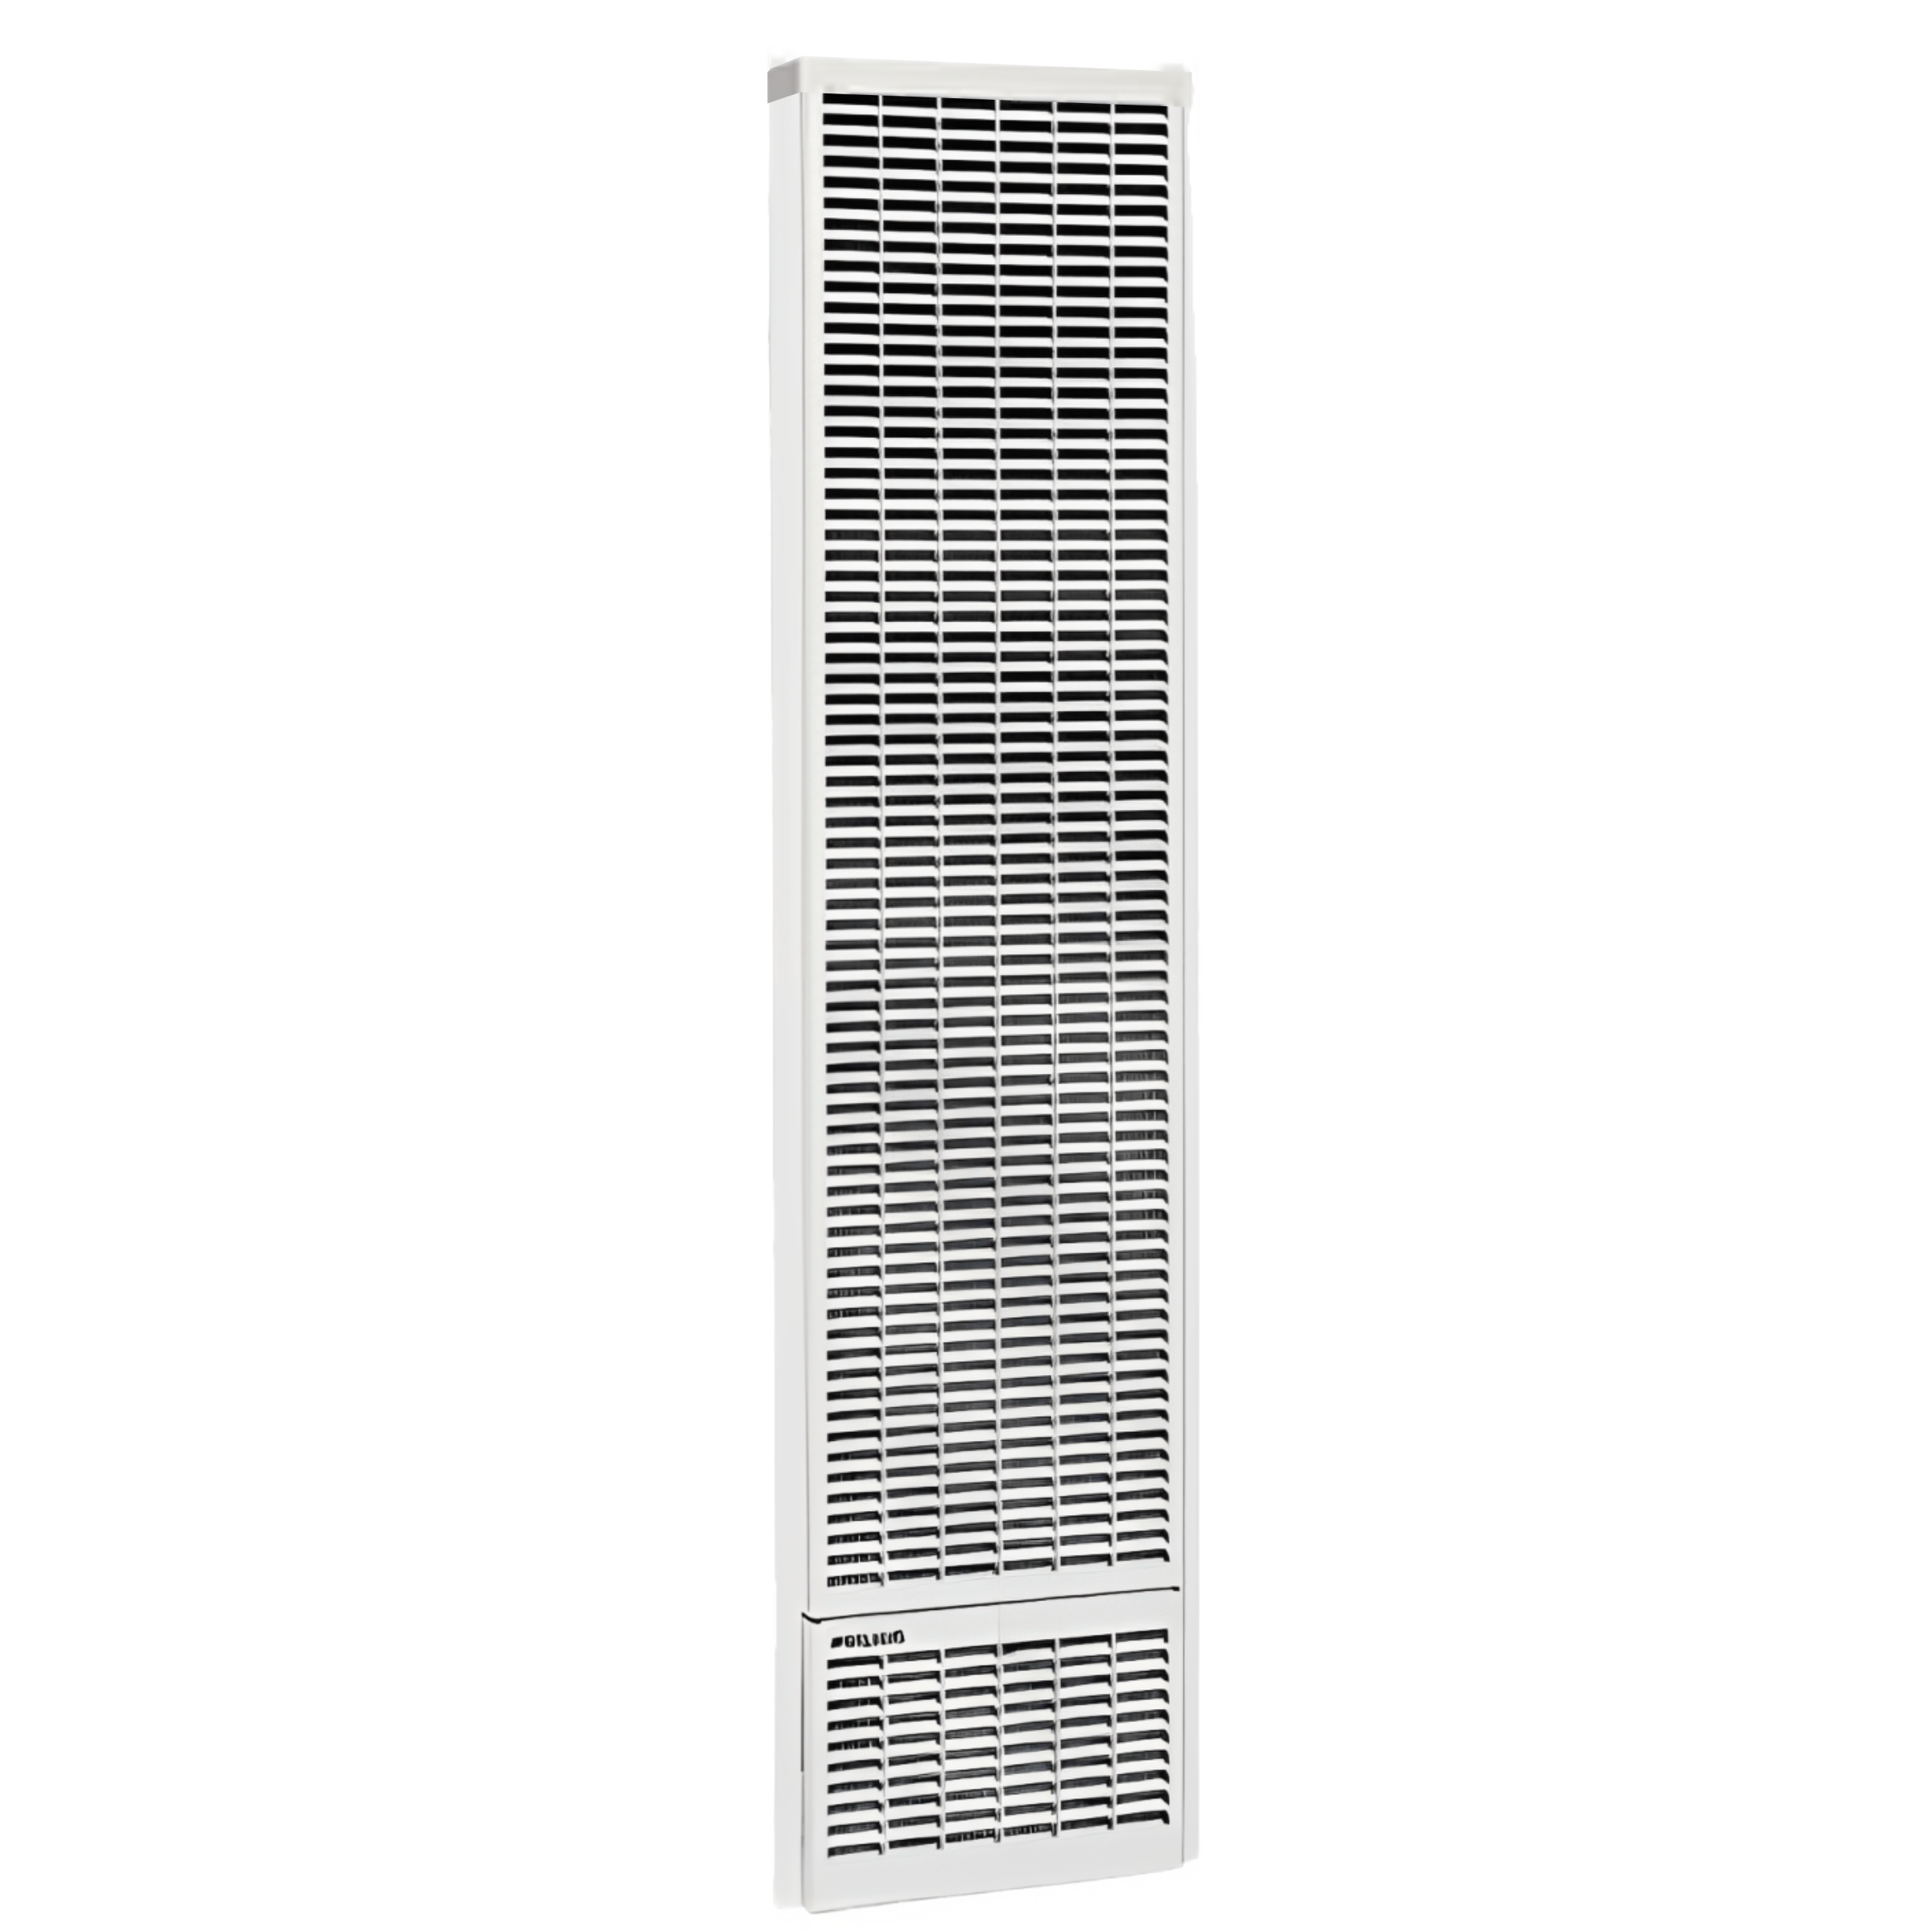 Williams Top Vent Gas Wall Heater Model AC2030T, Natural Gas Heater, Programmable Thermostat Included, Single Sided, 82% AFUE, 30000 BTU